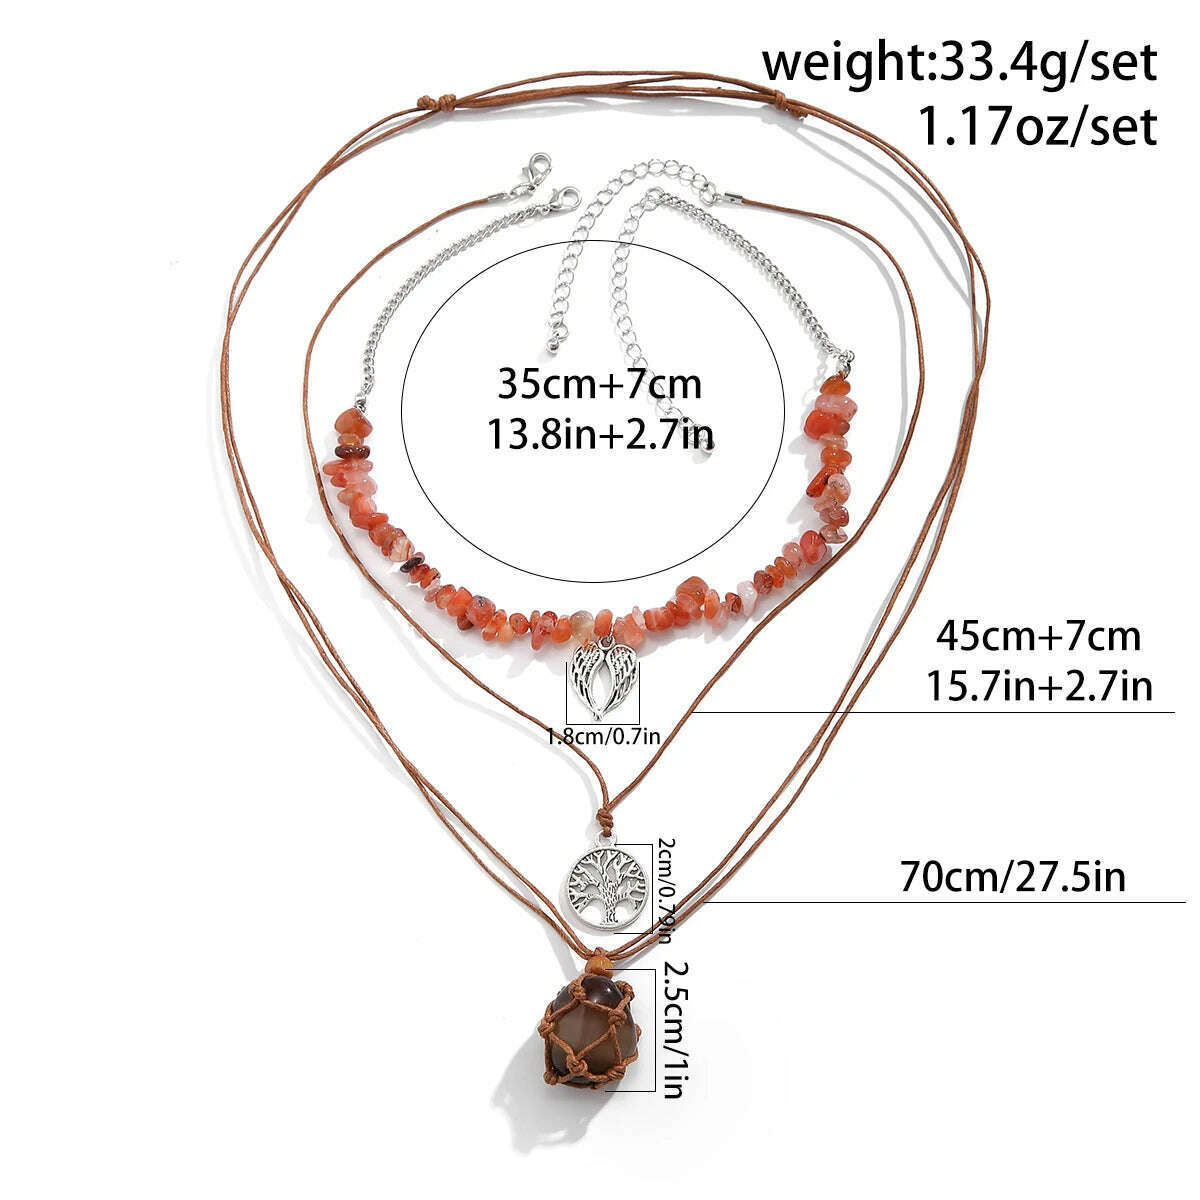 KIMLUD, 3Pcs Creative Stone Holder Cage Tree Dragonfly Pendant Choker Necklace Women Boho Rope Chain Aesthetic Y2K Jewelry Accessorie, KIMLUD Womens Clothes